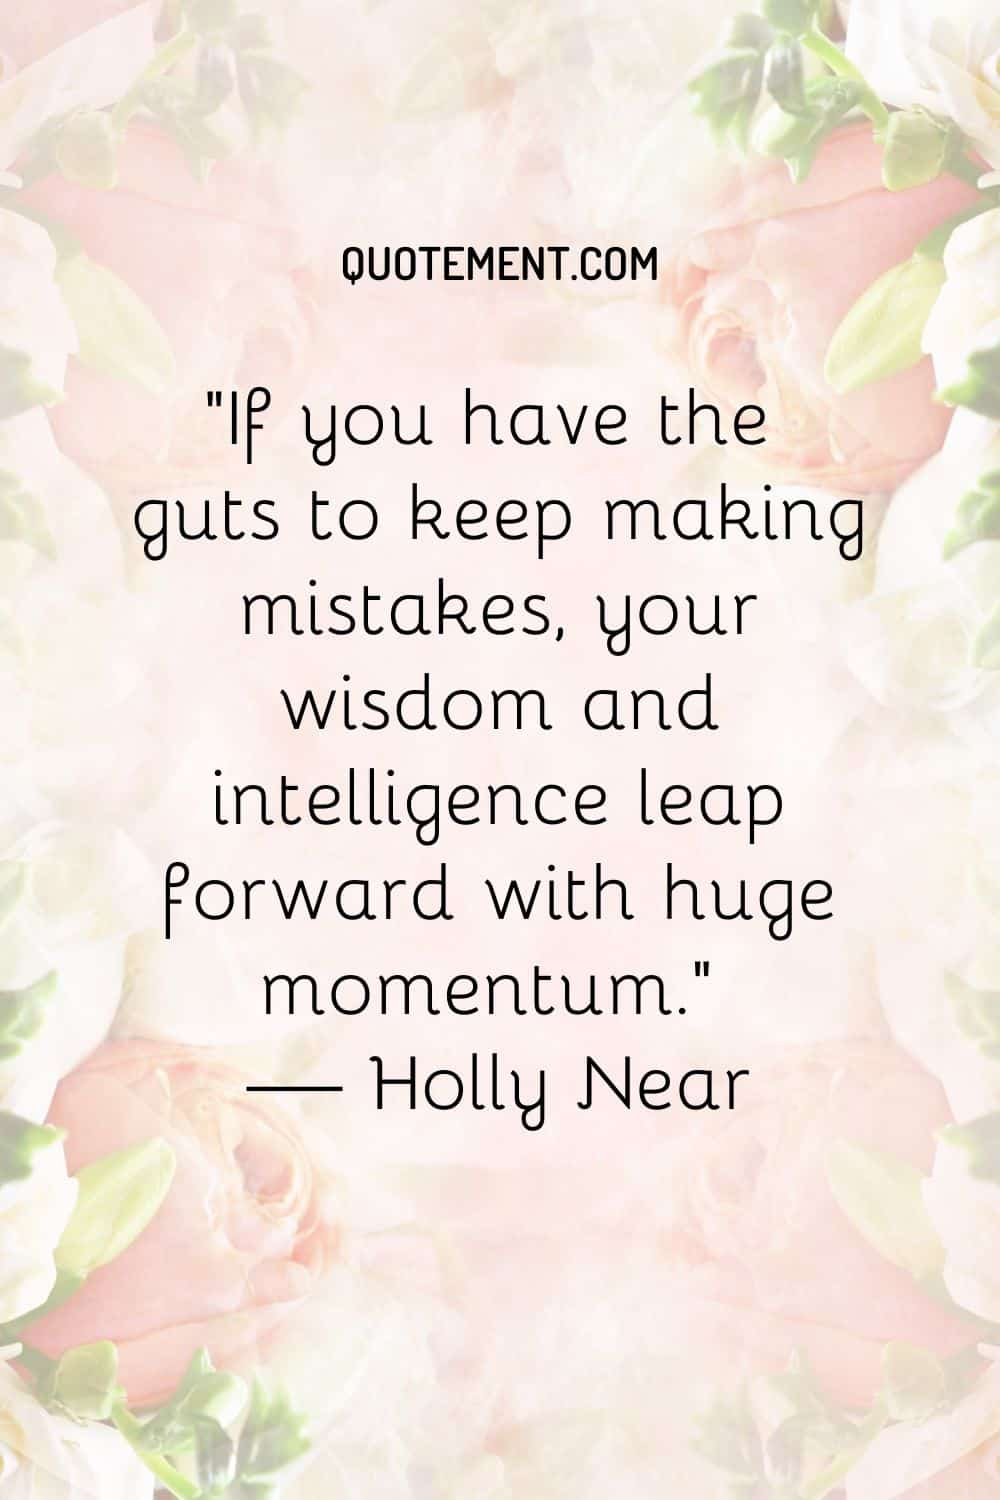 If you have the guts to keep making mistakes, your wisdom and intelligence leap forward with huge momentum